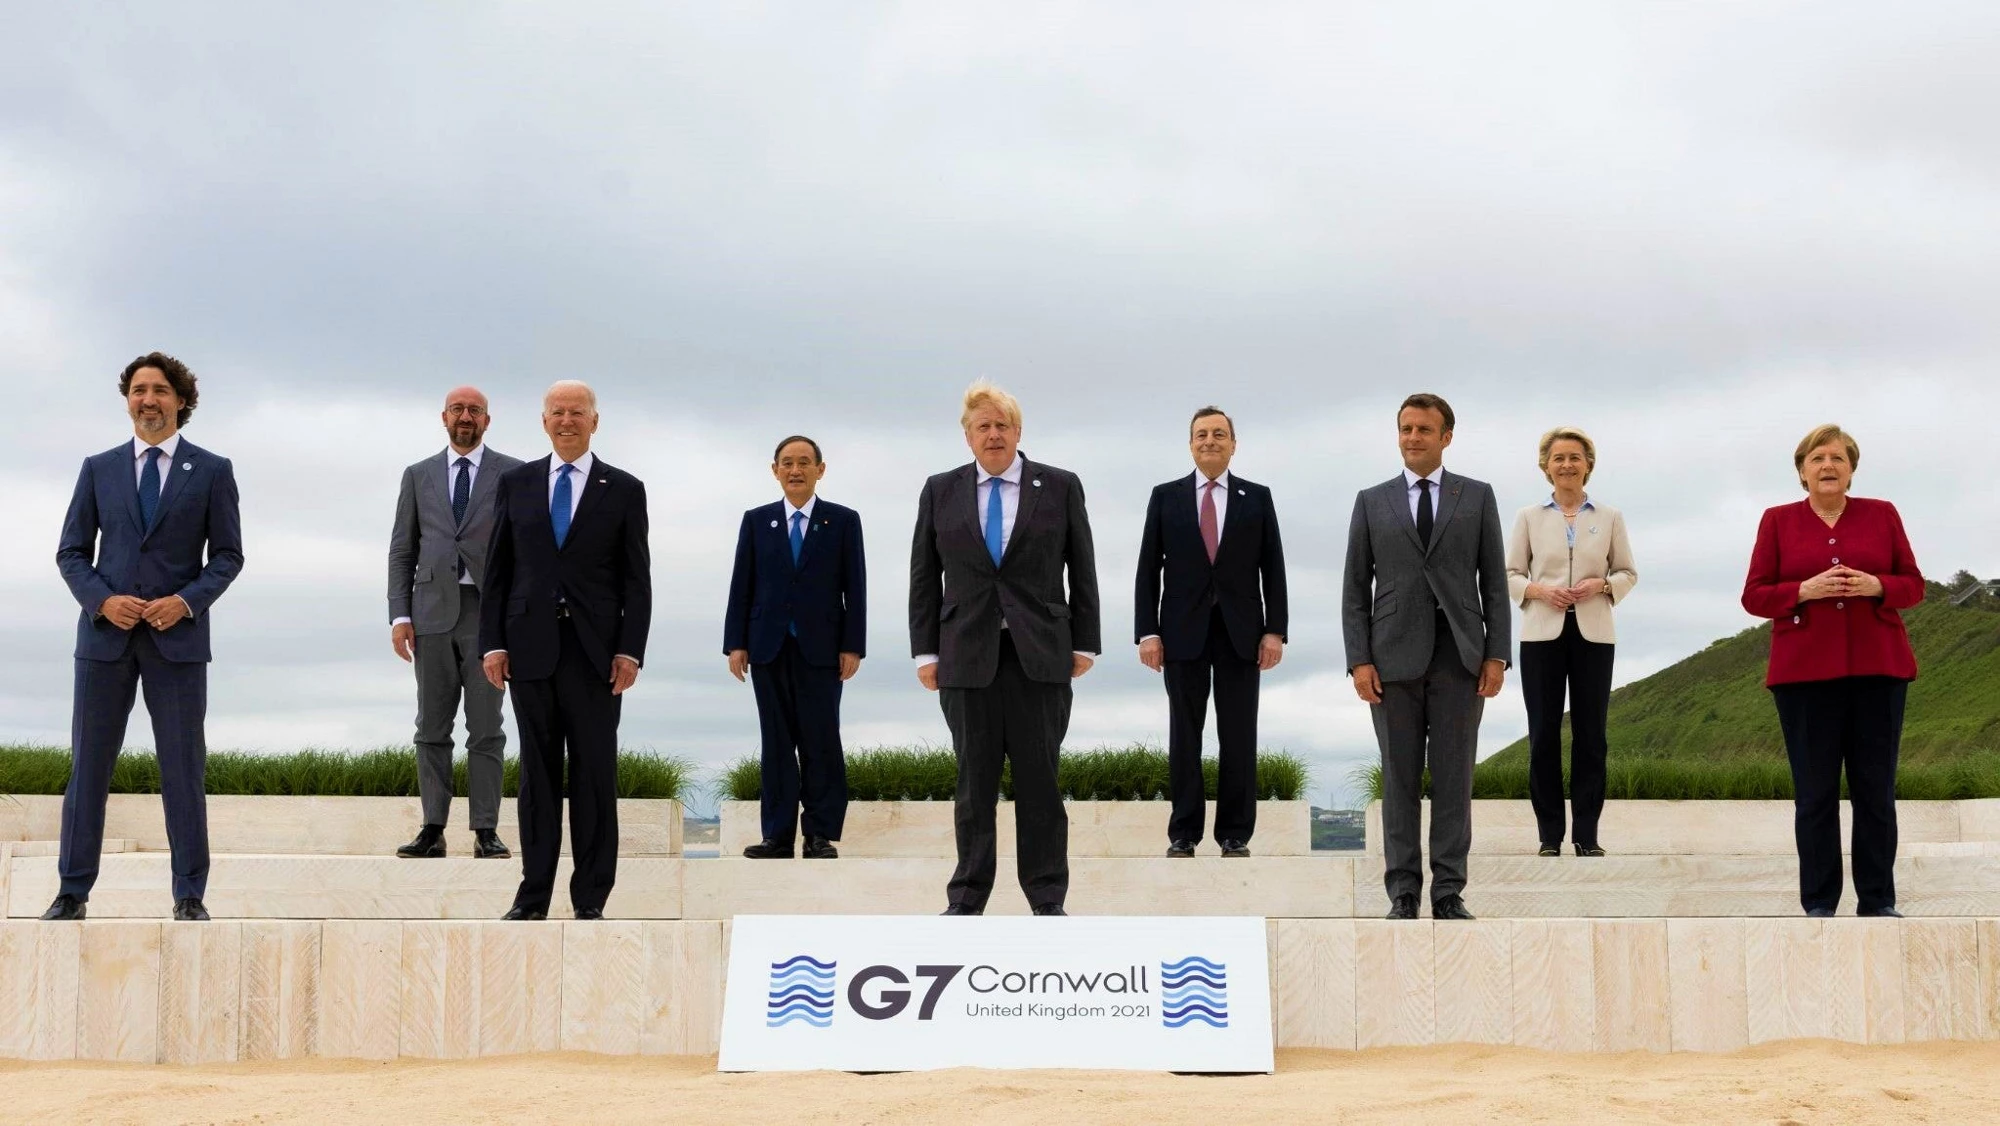 G7 message: Quality Infrastructure Investment: Ensuring a lasting recovery